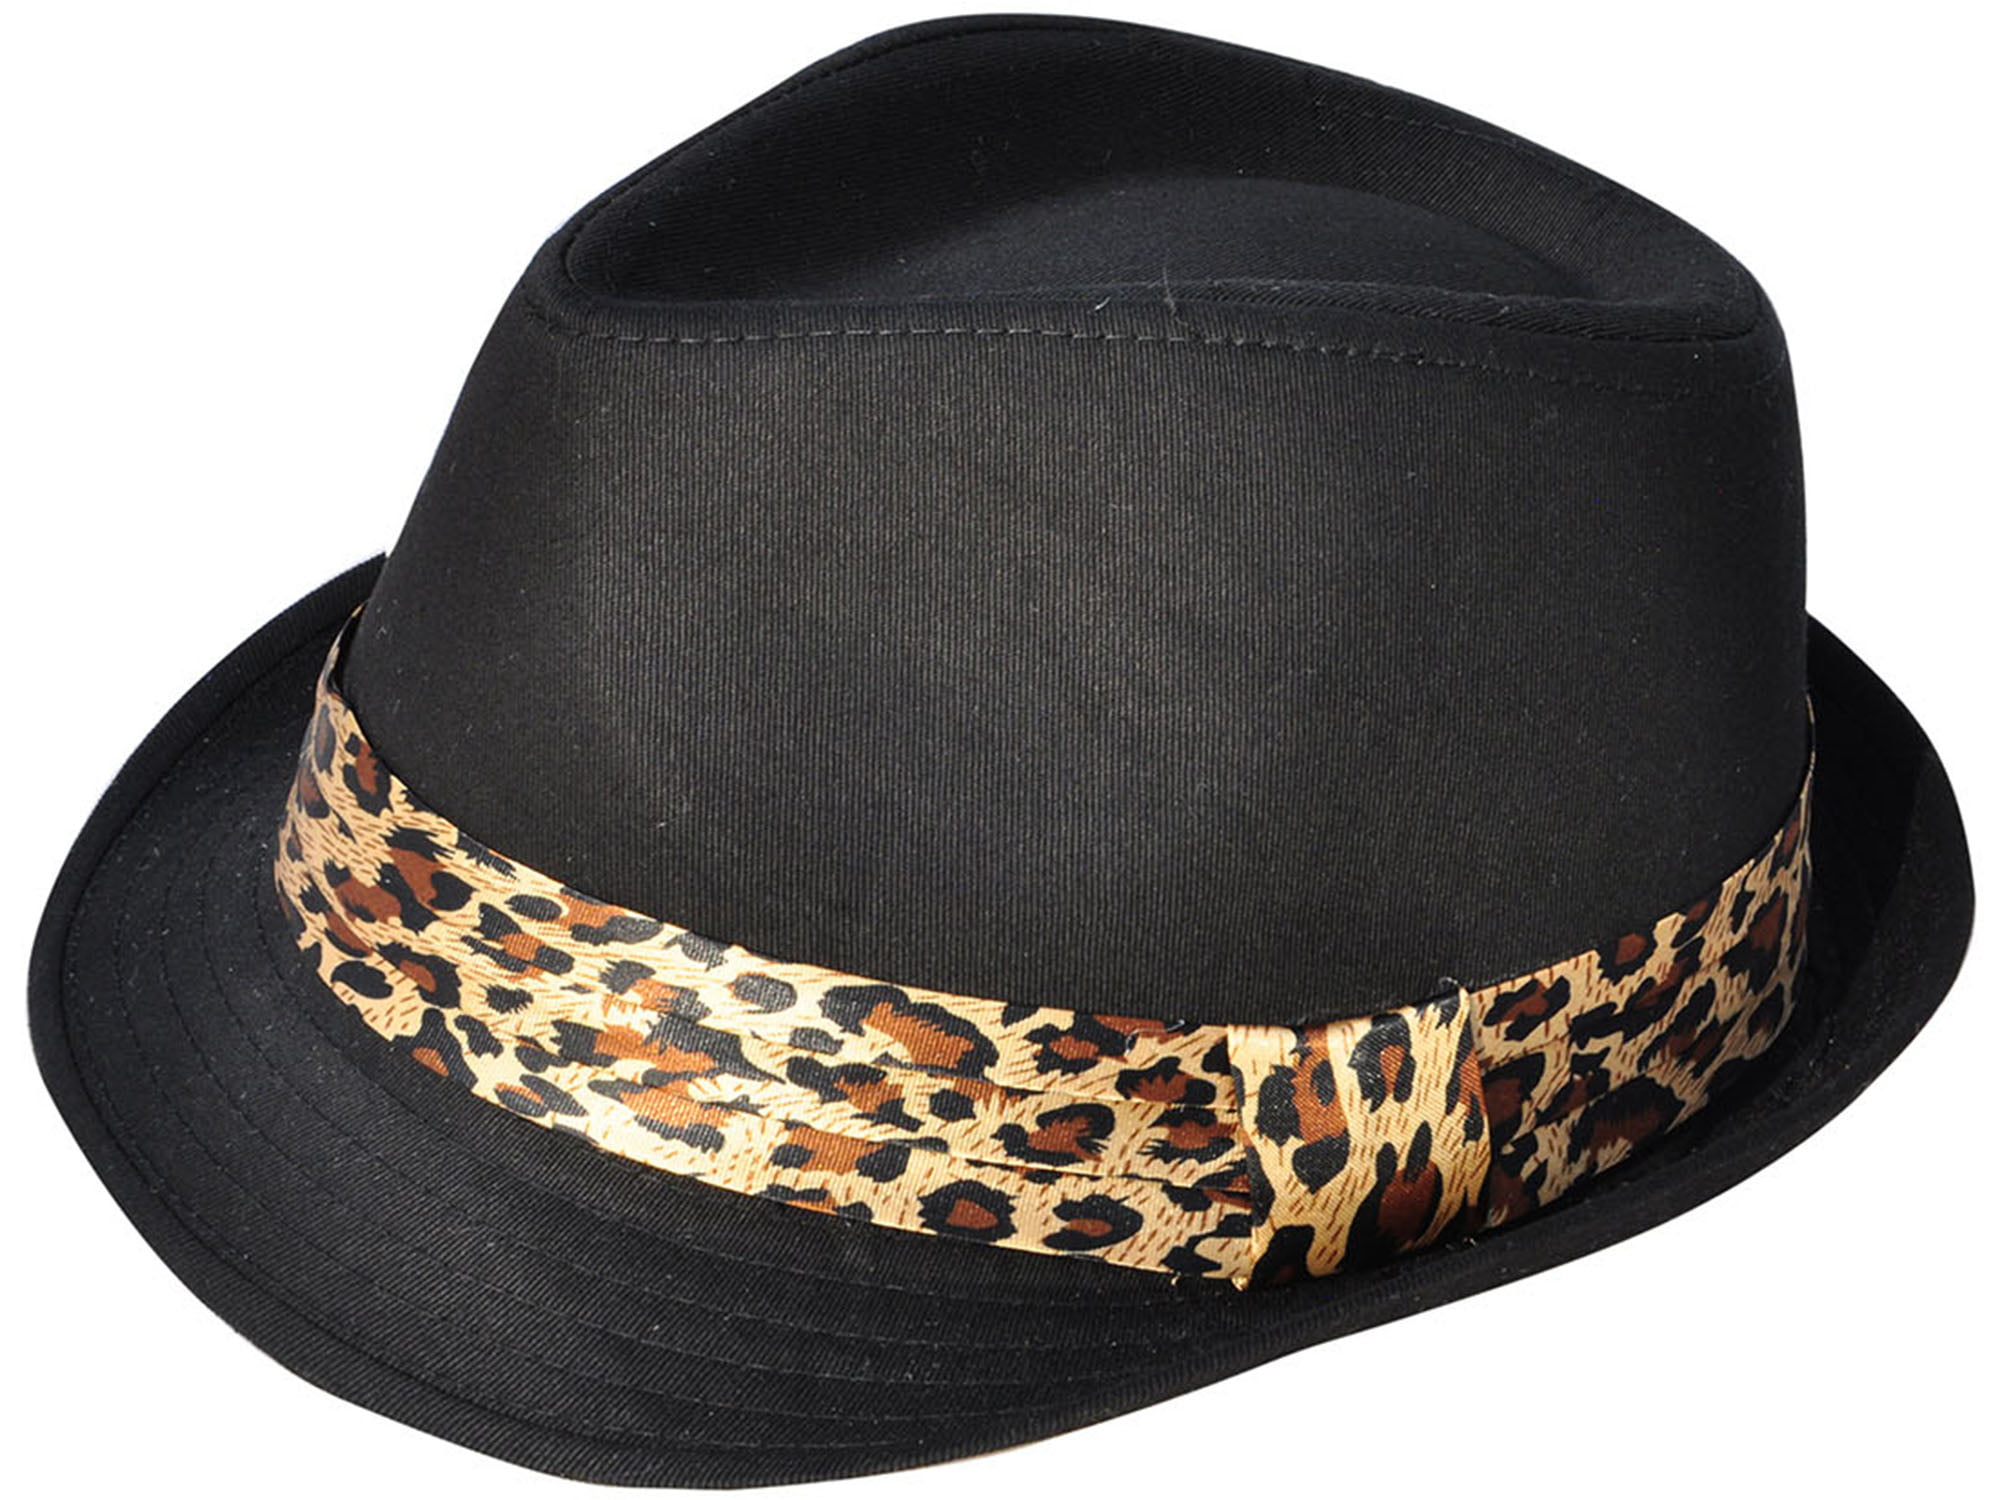 Simplicity Adult Feather Trilby Wool Fedora Hats, Black/Leopard Pattern Ban...